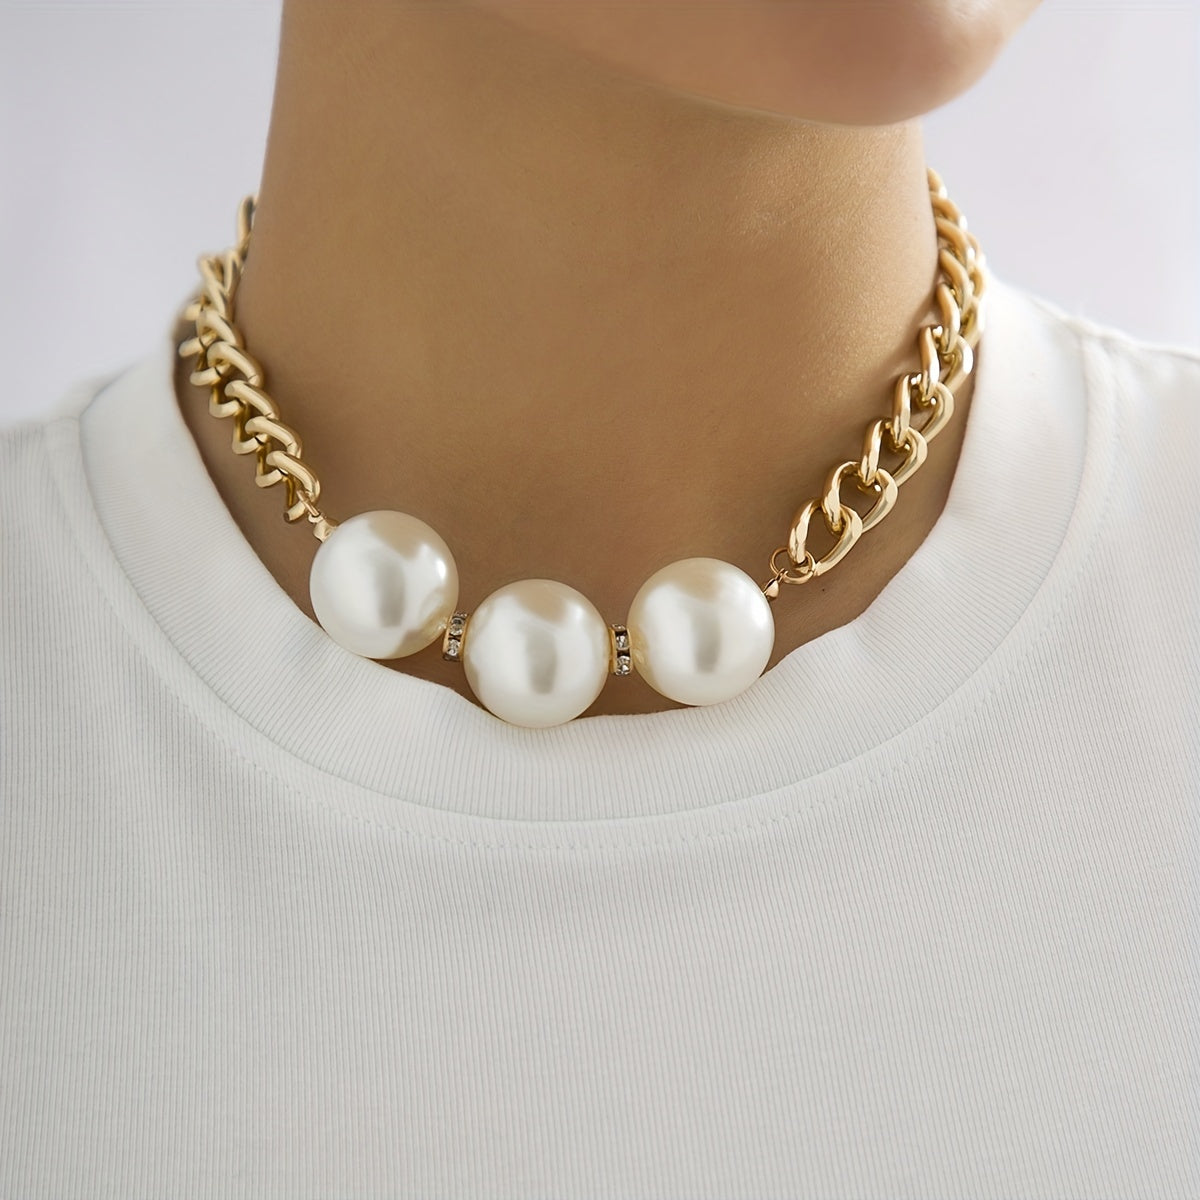 Gorgeous 1 Pc Ladies Fashion Pearl Chain Charm Necklace - A Stylish Accessory for Your Look!